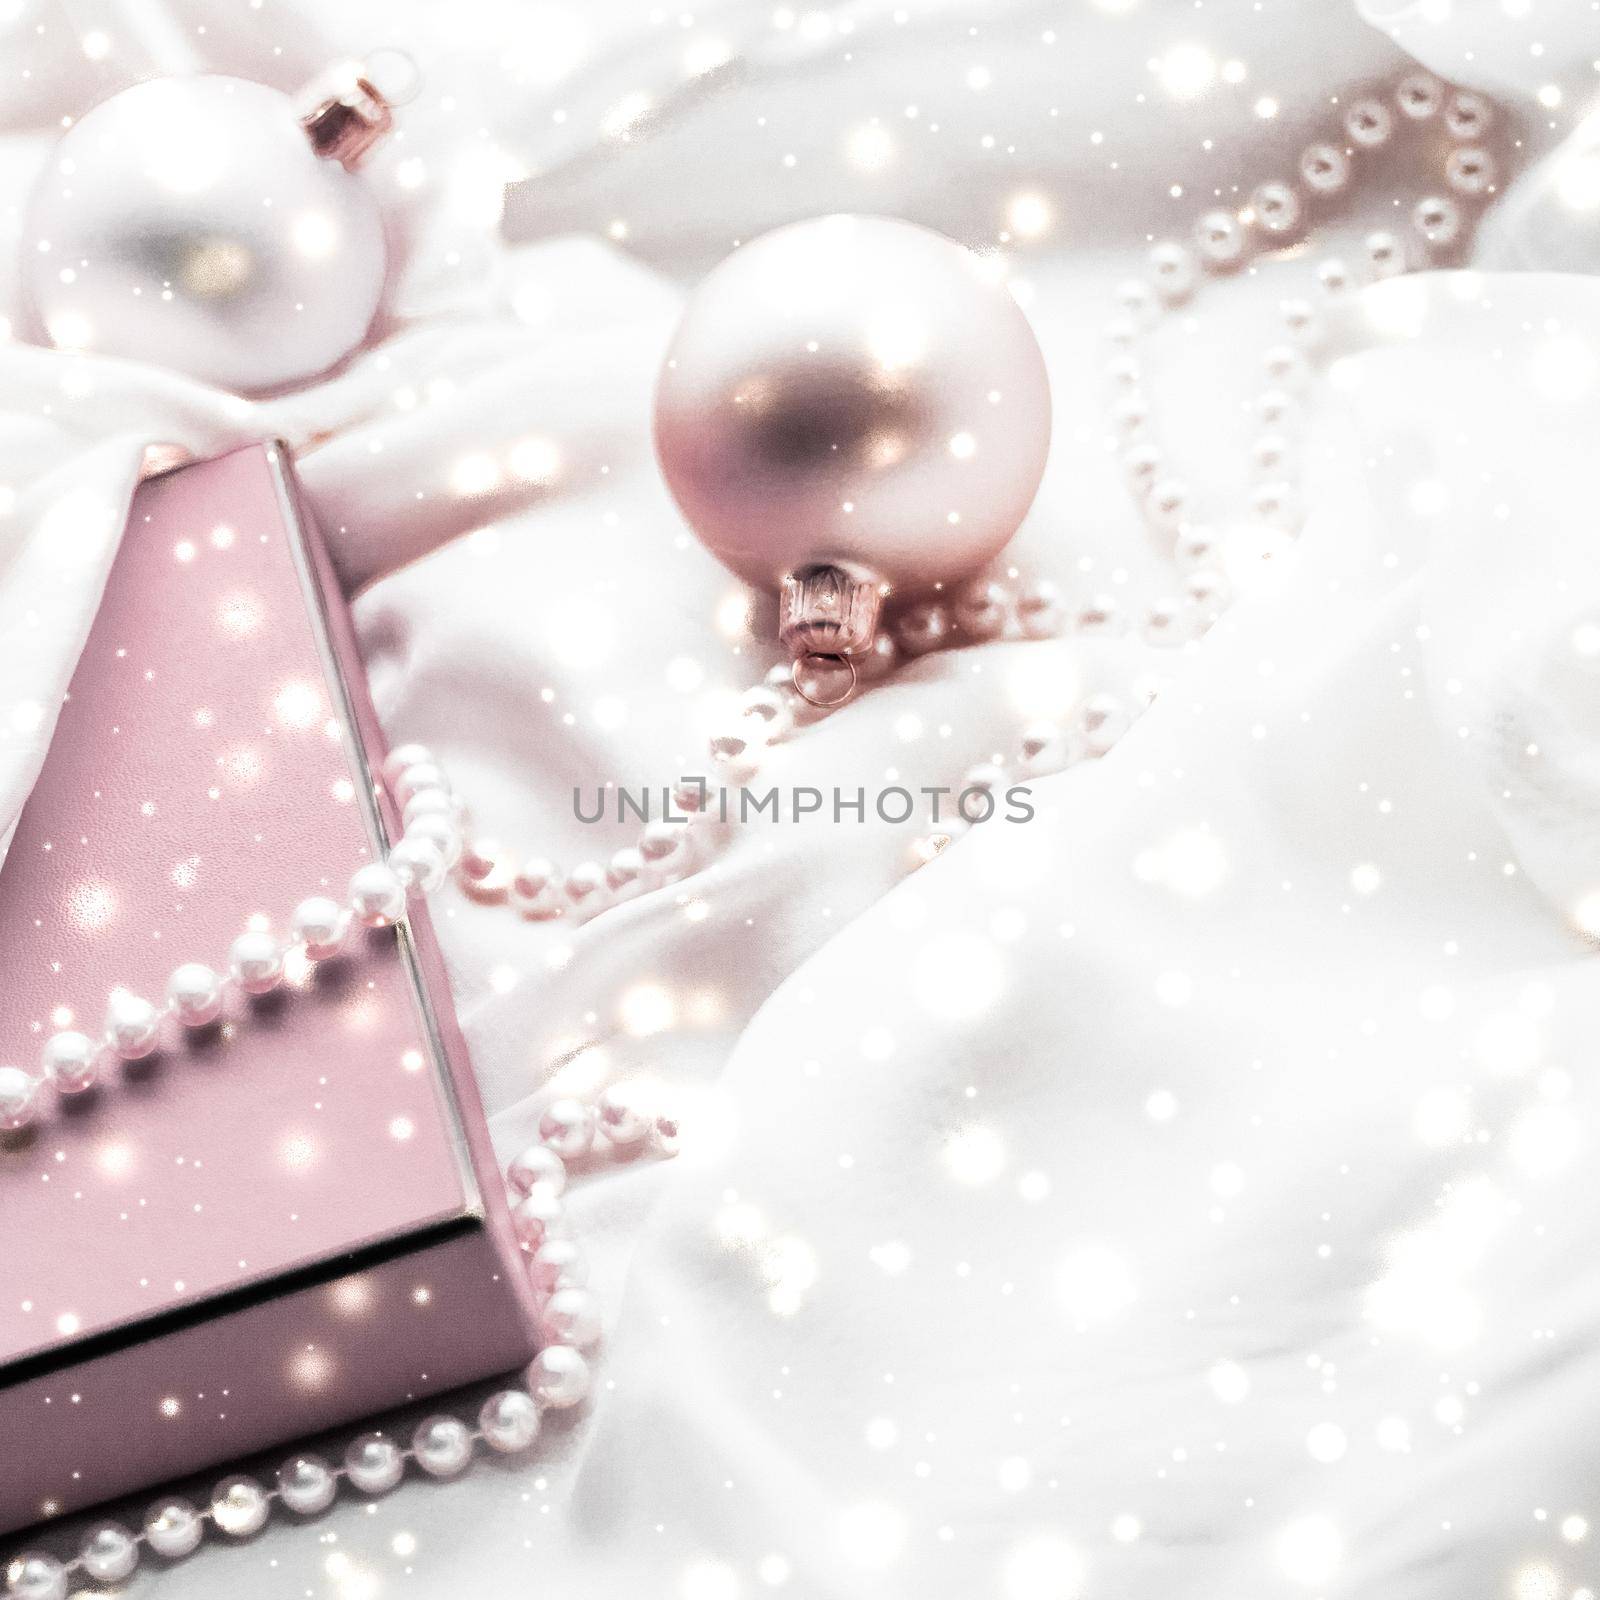 Holidays branding, glamour and decoration concept - Christmas magic holiday background, festive baubles, blush pink vintage gift box and gold glitter as winter season present for luxury brand design